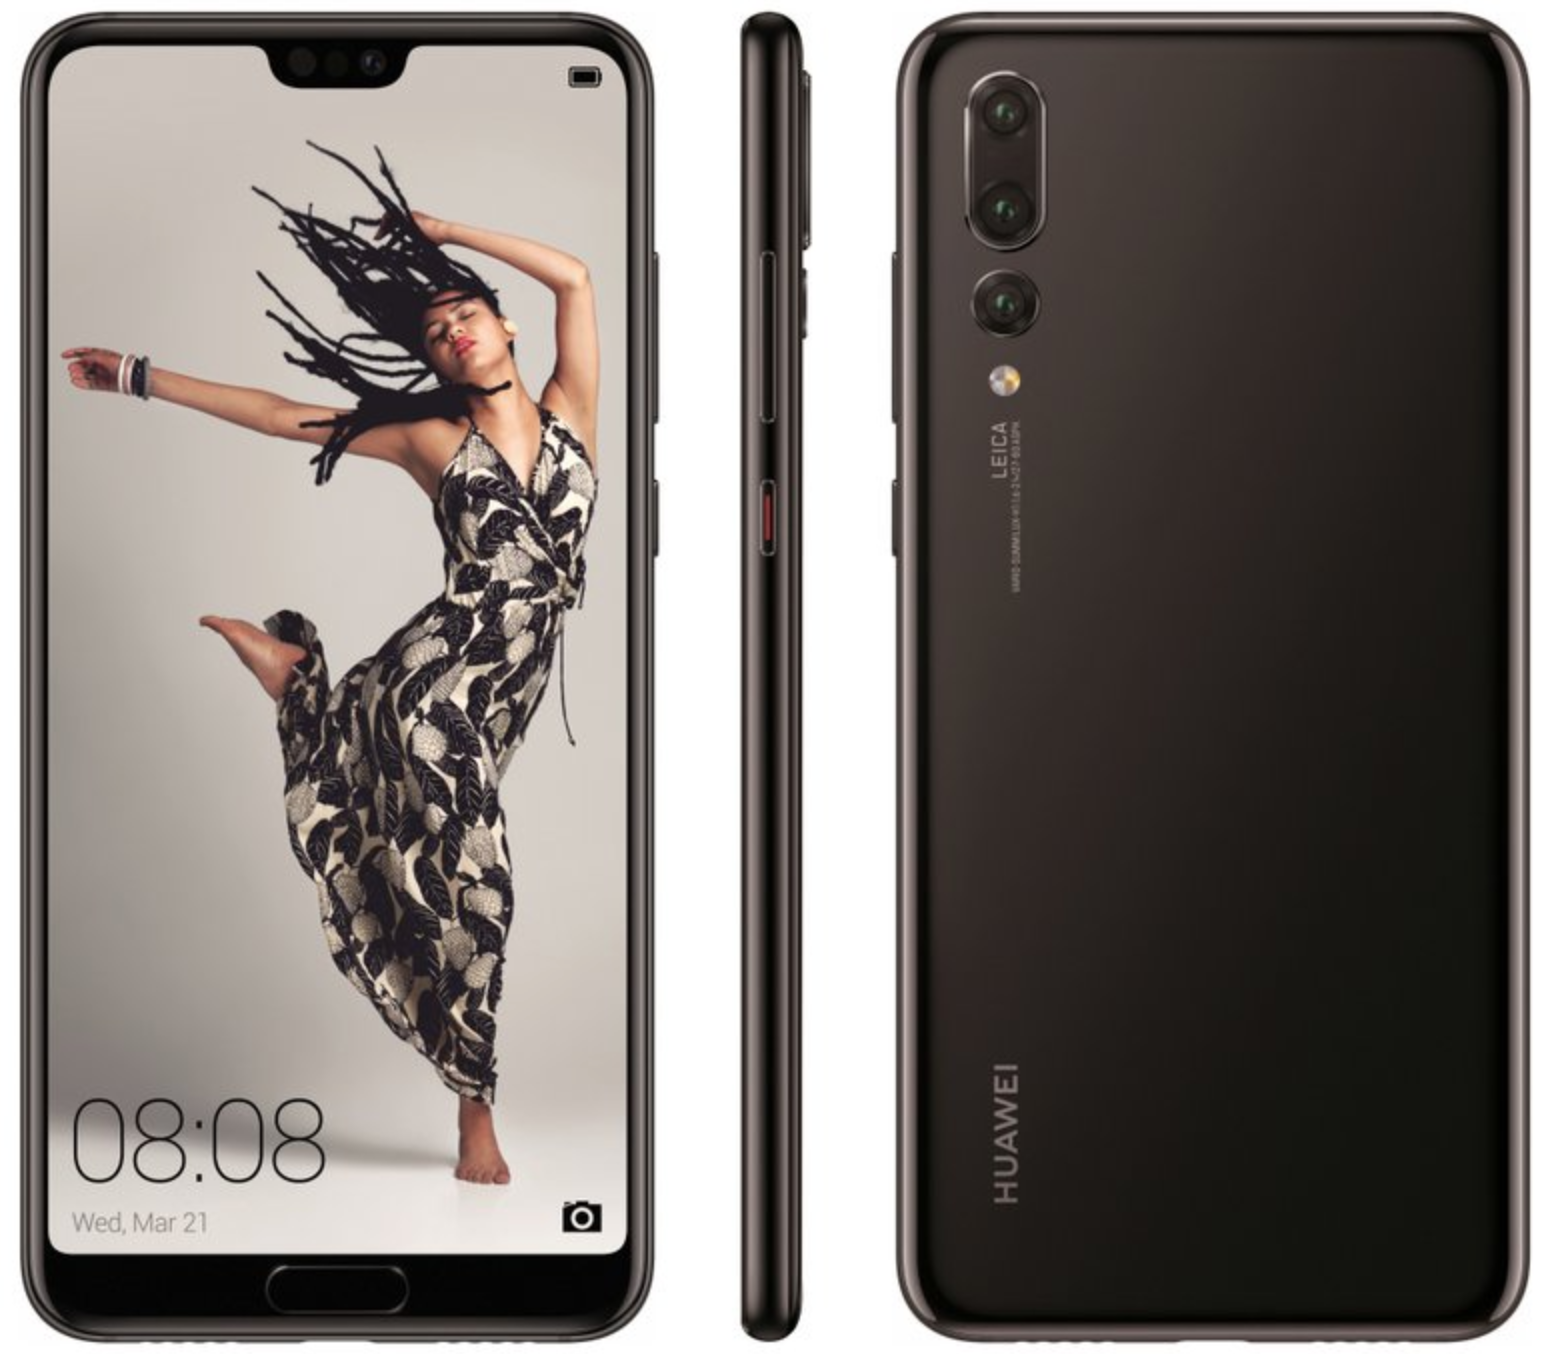 How much power will the Huawei P20 pack?